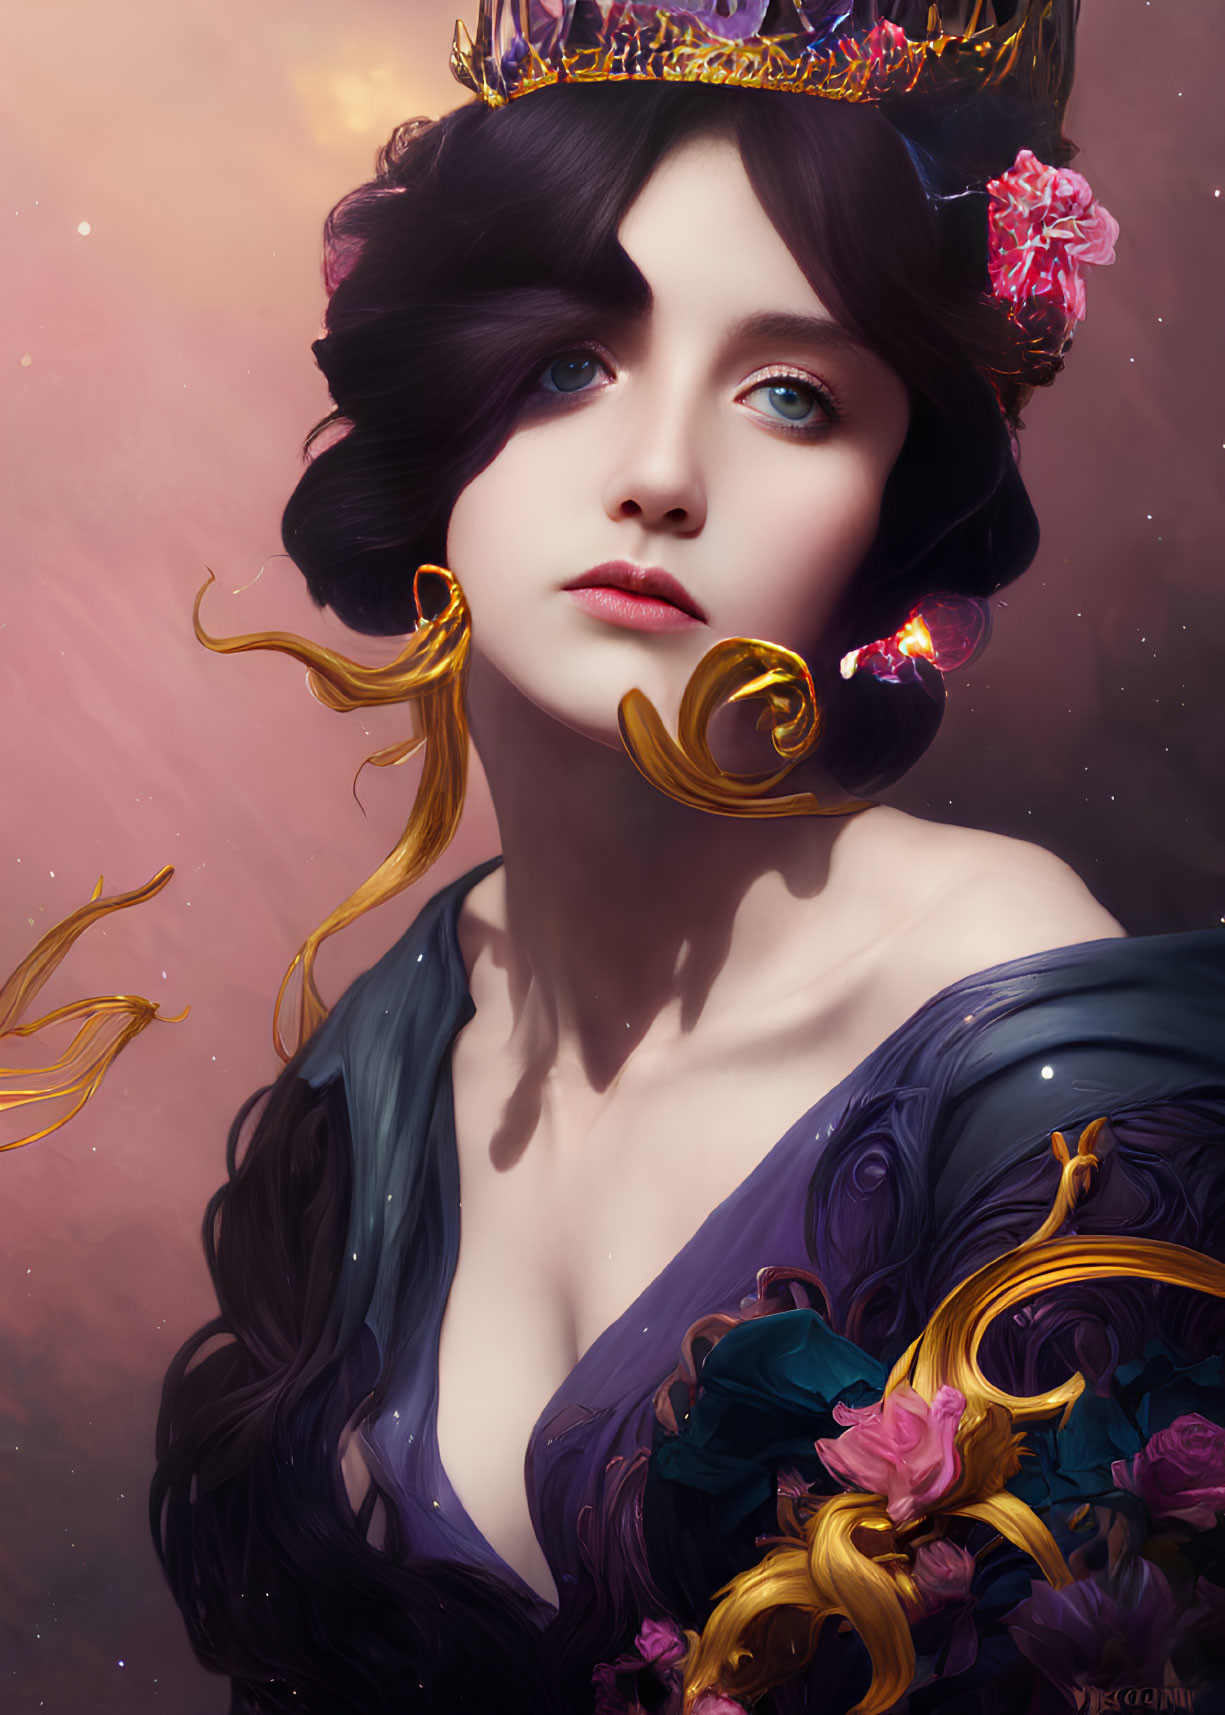 Woman with Crown in Digital Portrait Surrounded by Golden Swirls and Flowers